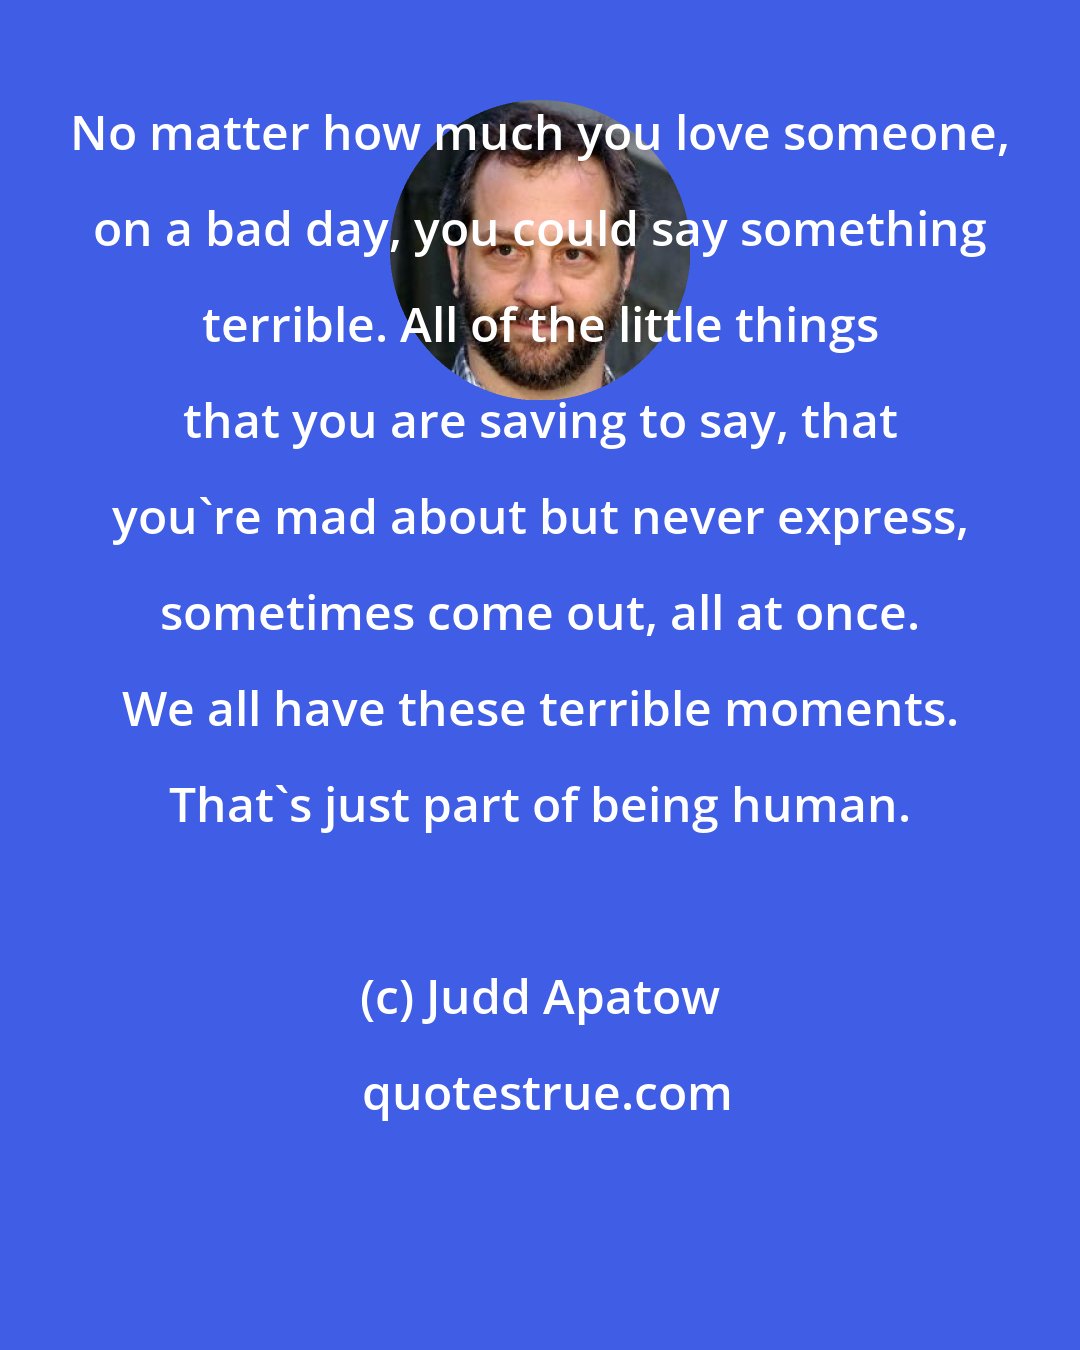 Judd Apatow: No matter how much you love someone, on a bad day, you could say something terrible. All of the little things that you are saving to say, that you're mad about but never express, sometimes come out, all at once. We all have these terrible moments. That's just part of being human.